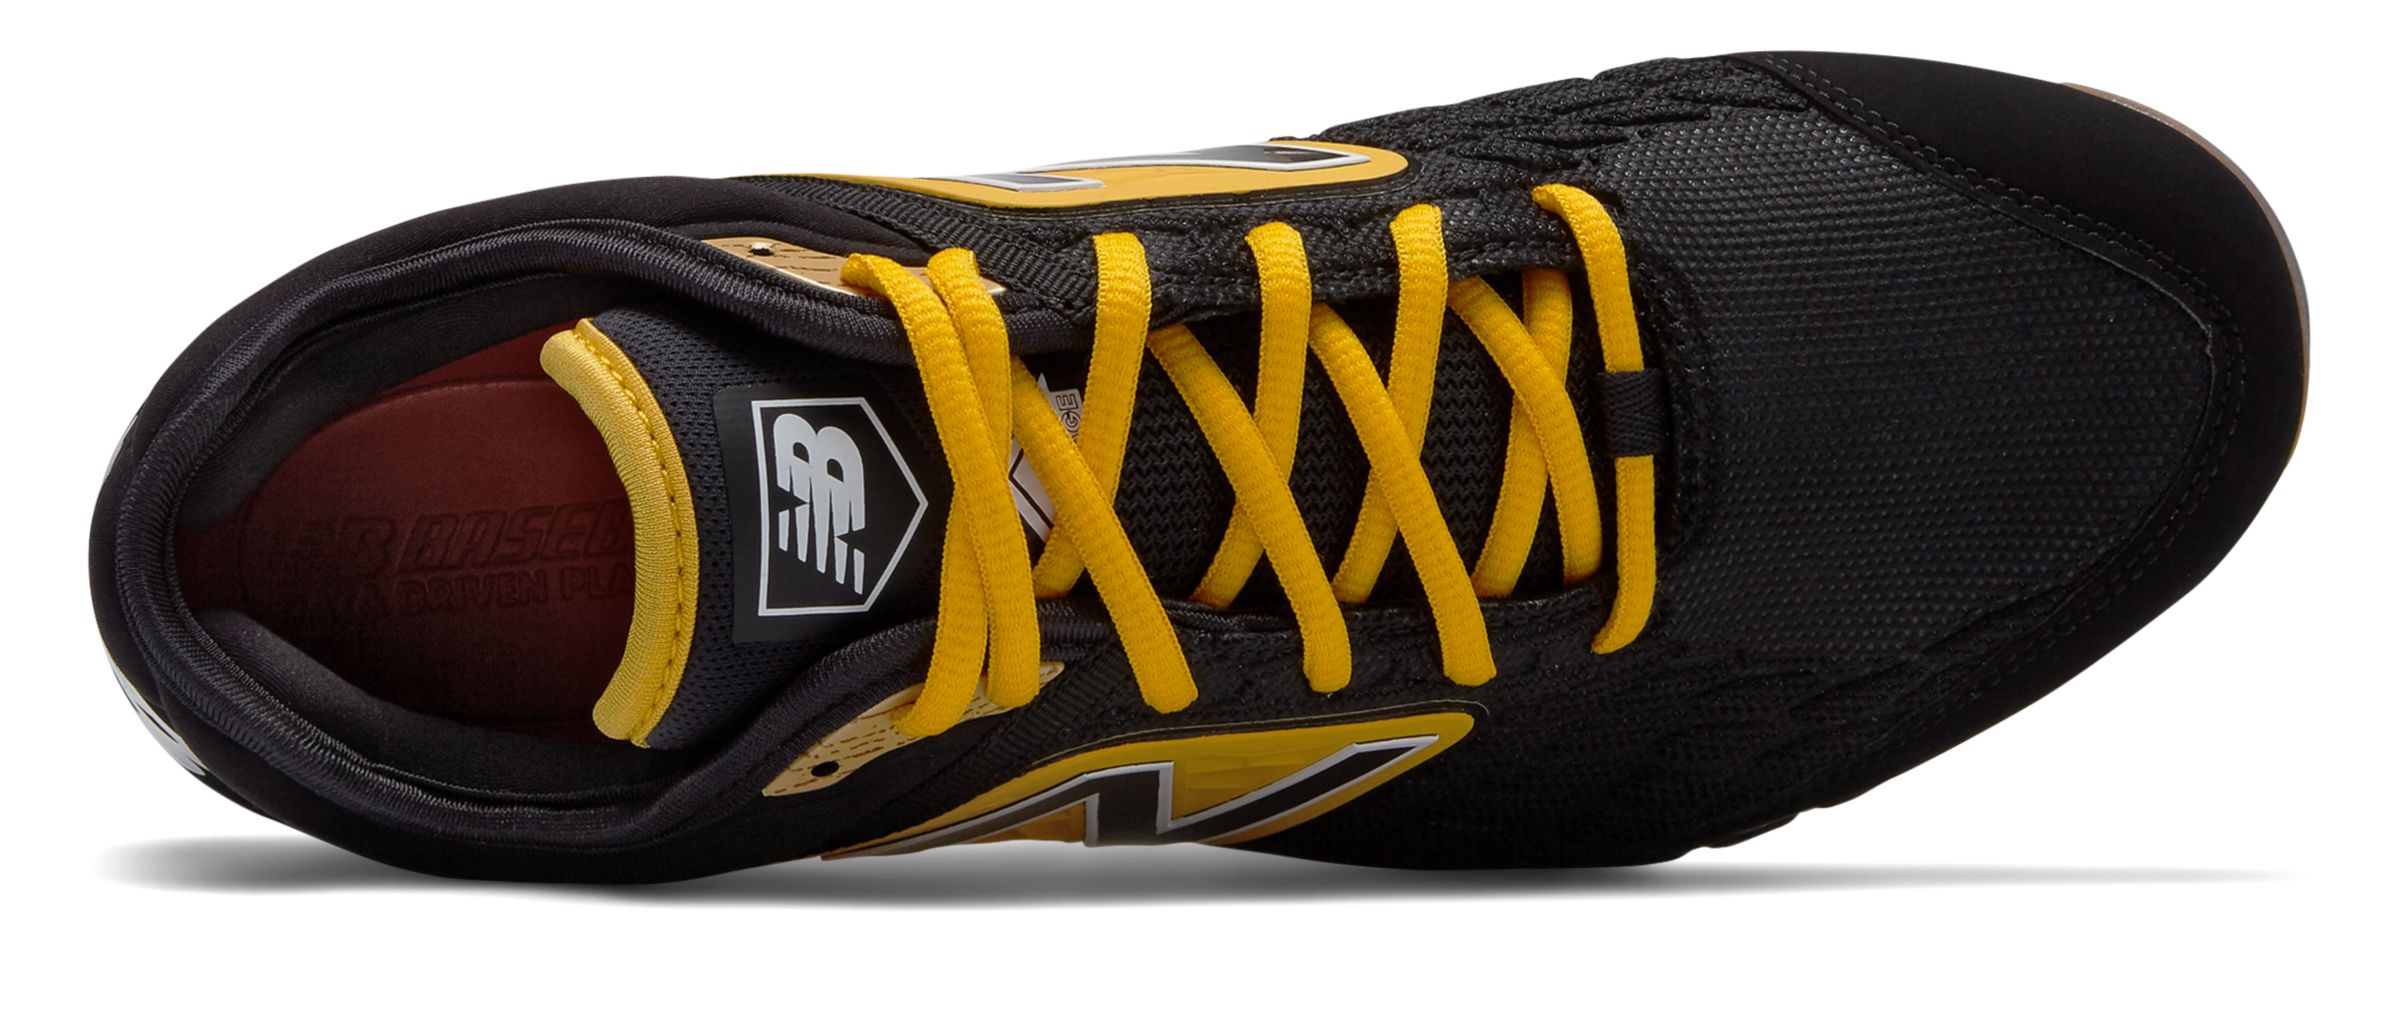 New Balance Low-Cut 3000v4 Metal Baseball Cleat Mens Shoes Black with Yellow - image 3 of 4